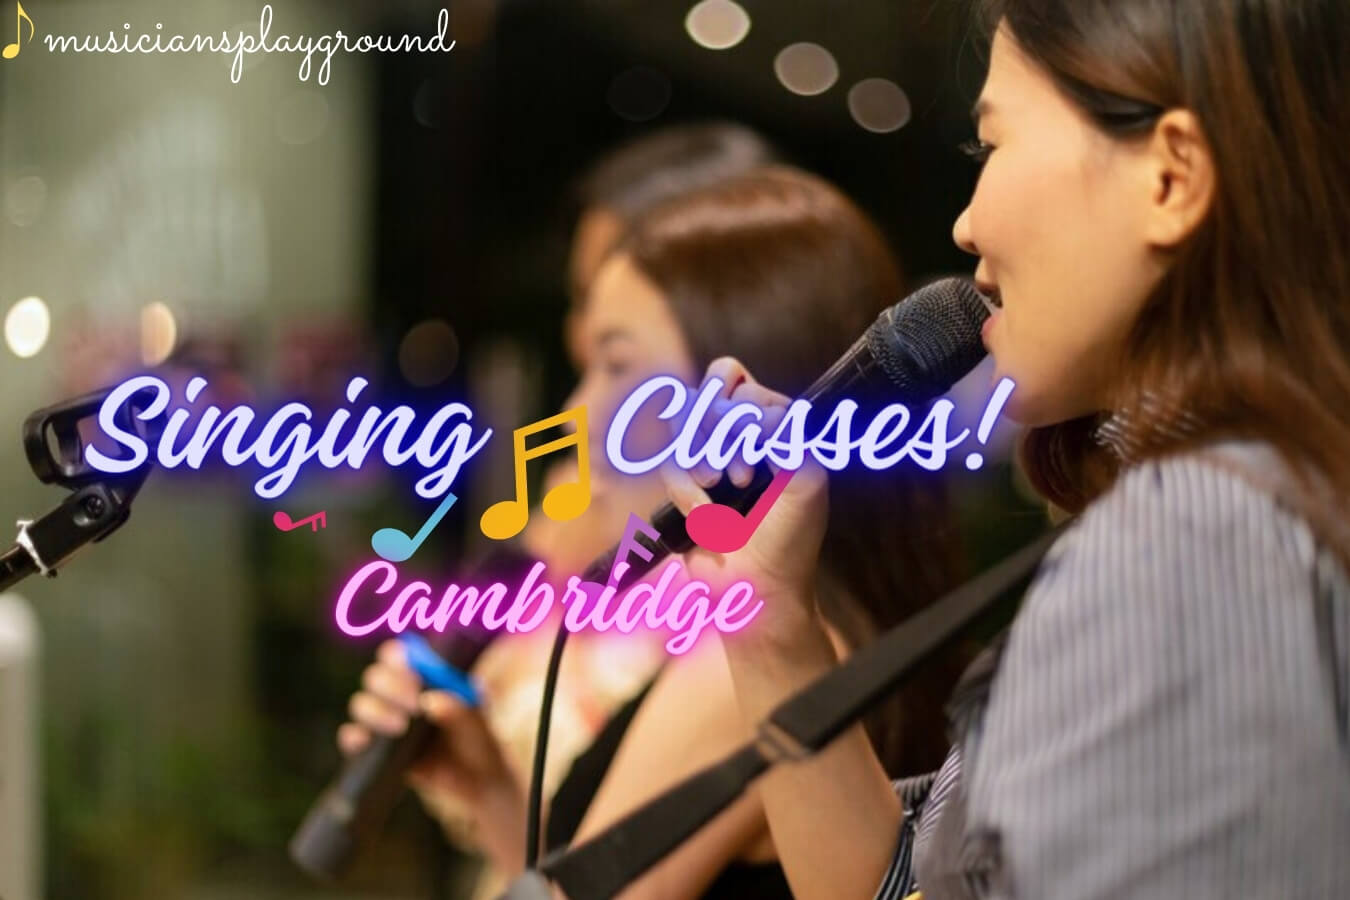 Welcome to Singing Classes in Cambridge, Massachusetts